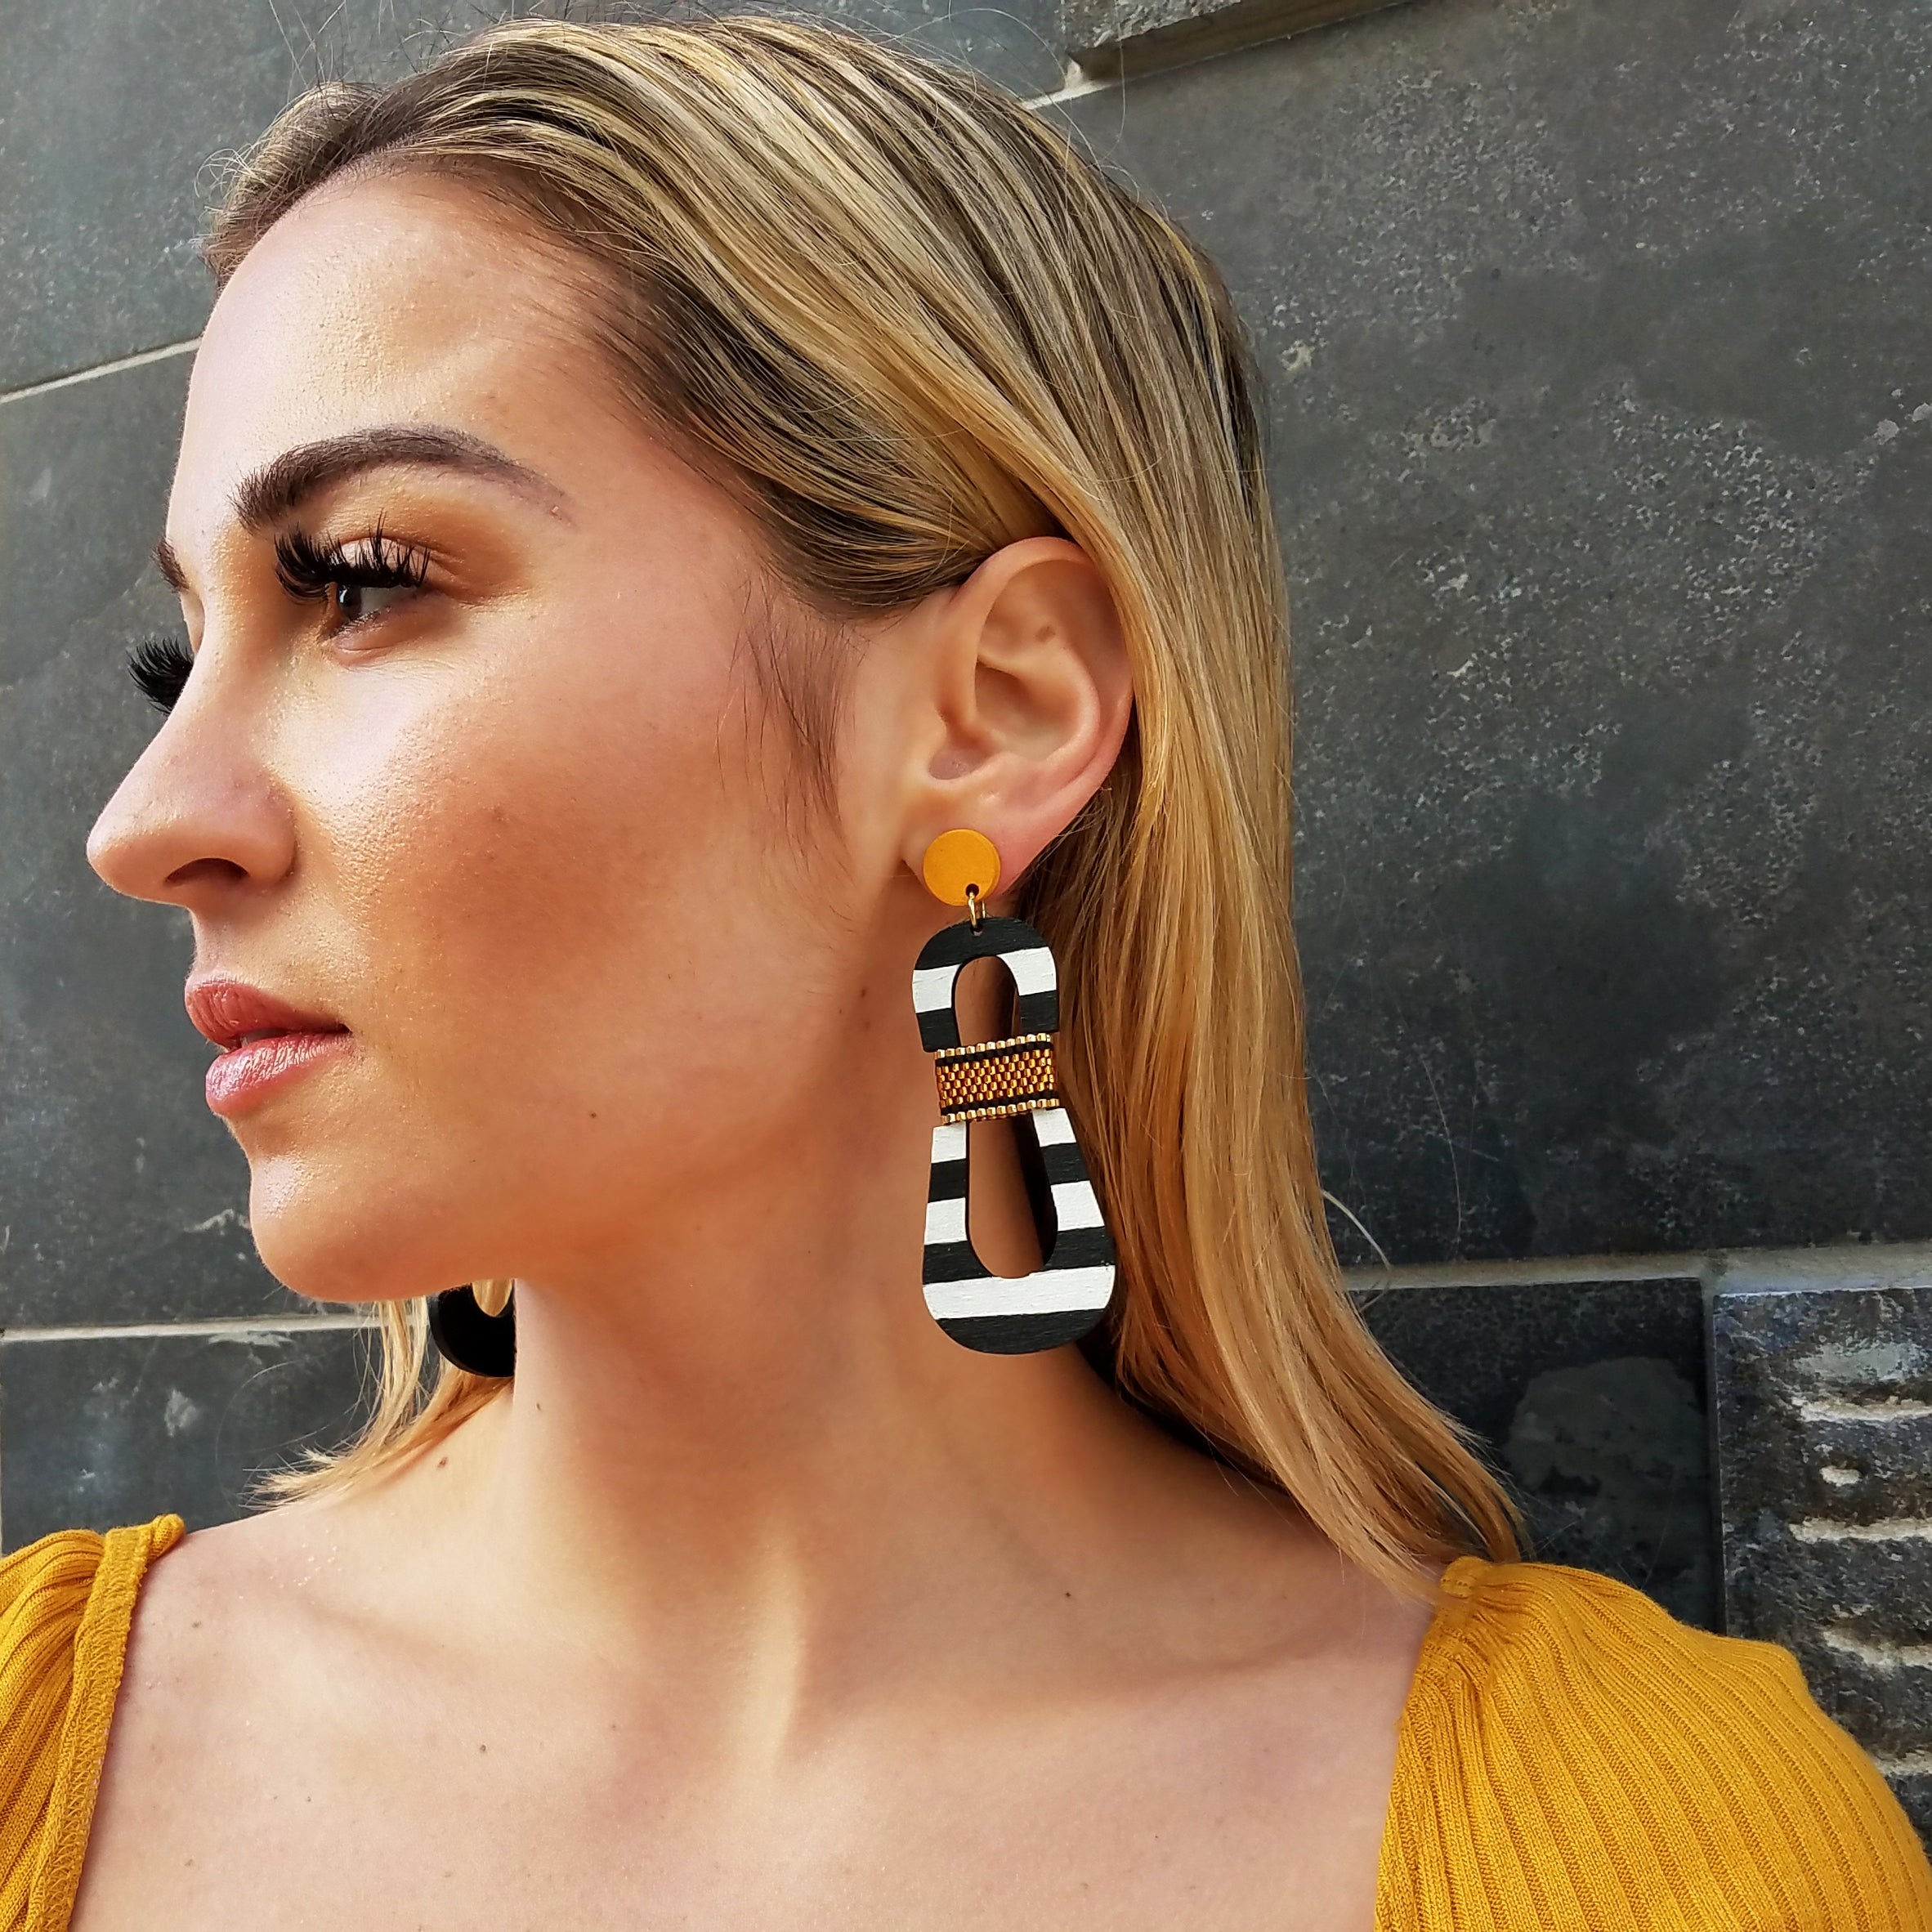 Side view of model wearing modern, curvy, black and white striped statement earrings with hand-beaded yellow accents by the brand SCOTCHBONNET.